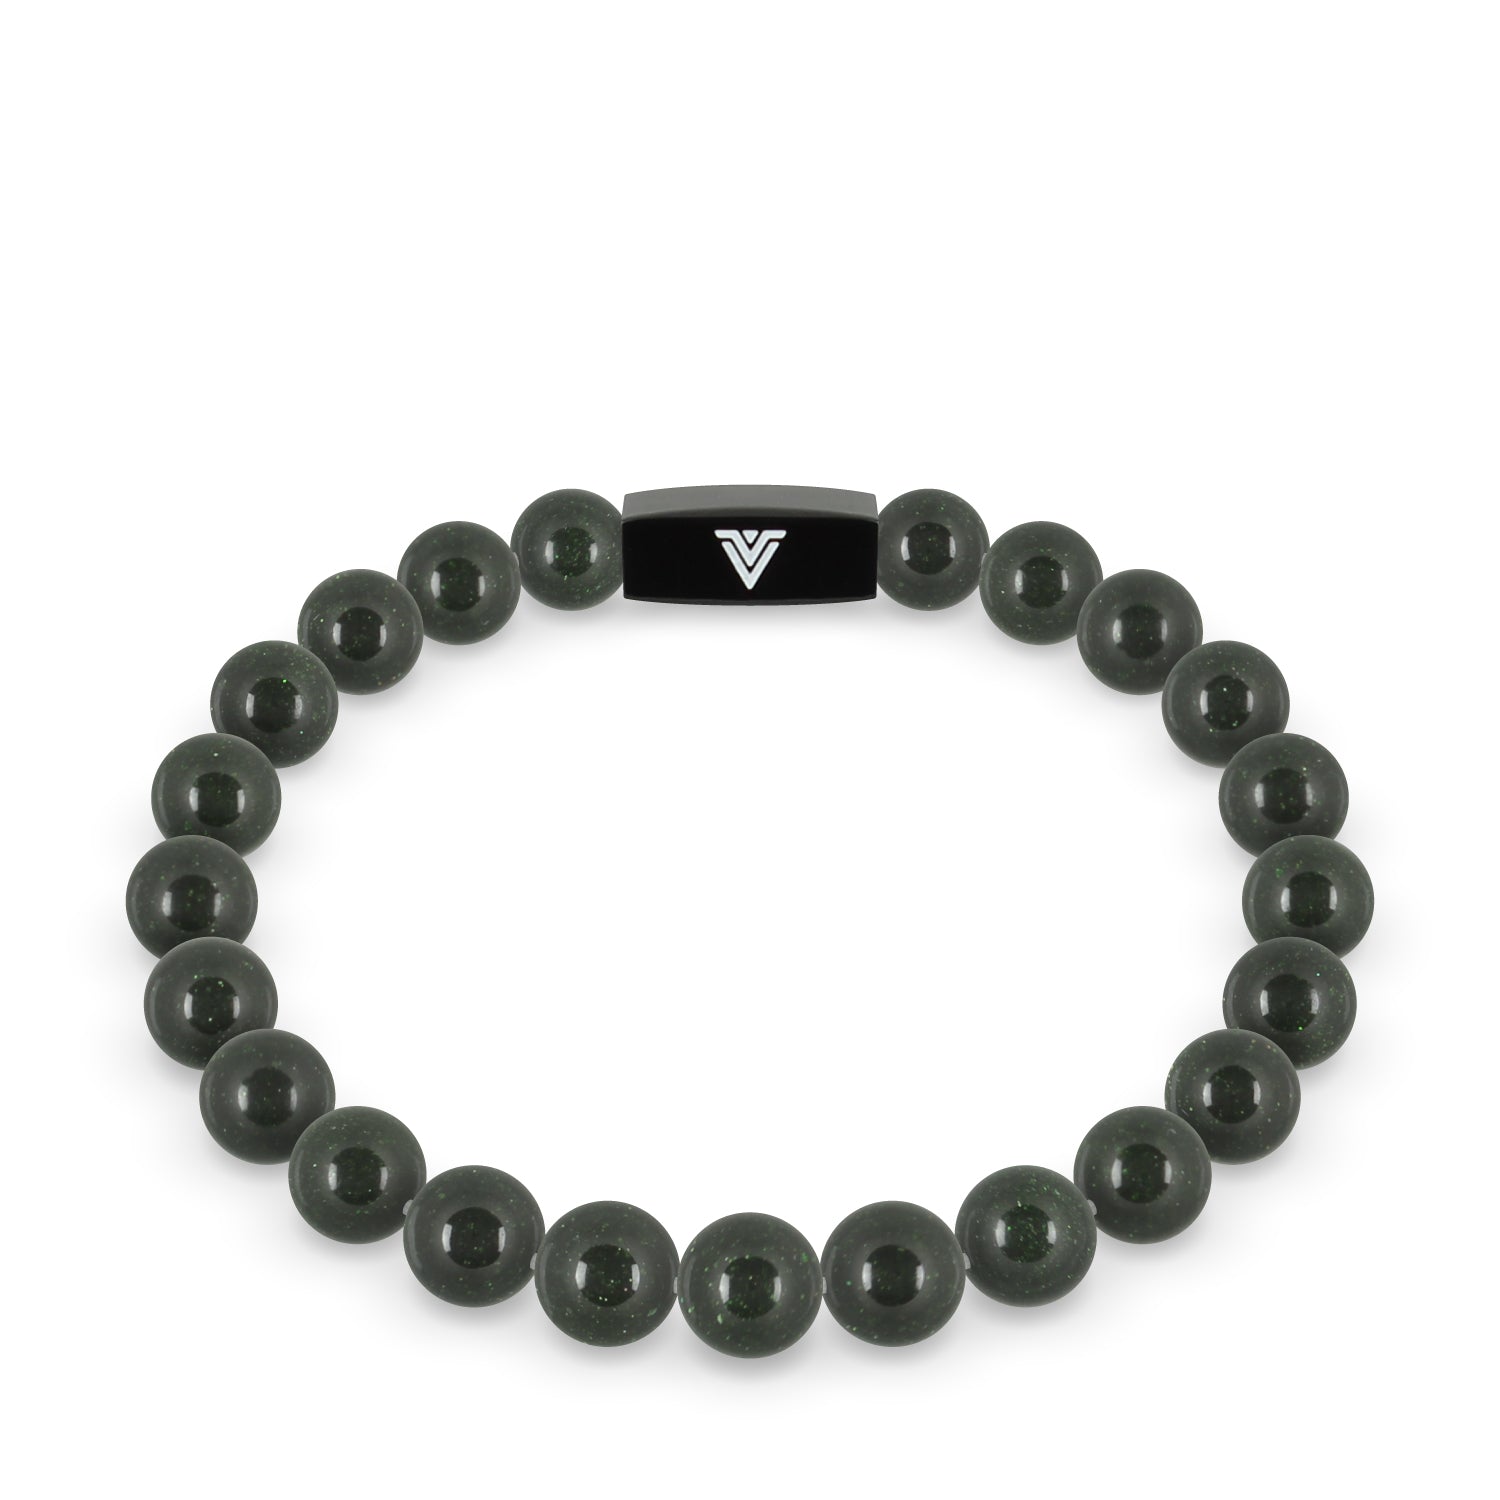 Front view of an 8mm Green Goldstone crystal beaded stretch bracelet with black stainless steel logo bead made by Voltlin